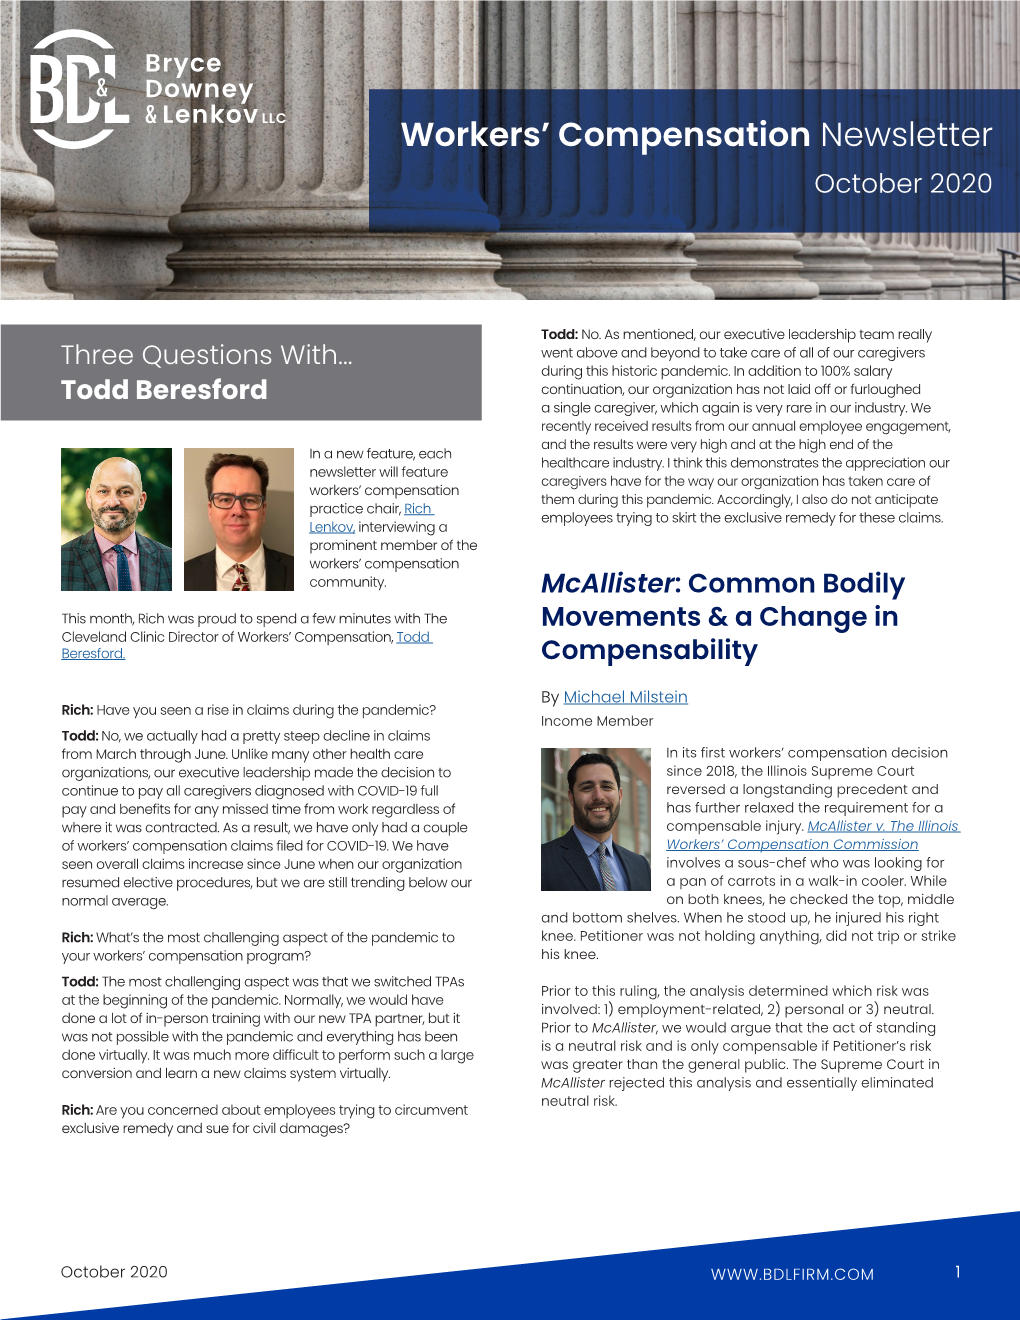 Illinois Workers' Compensation Newsletter, October 2020